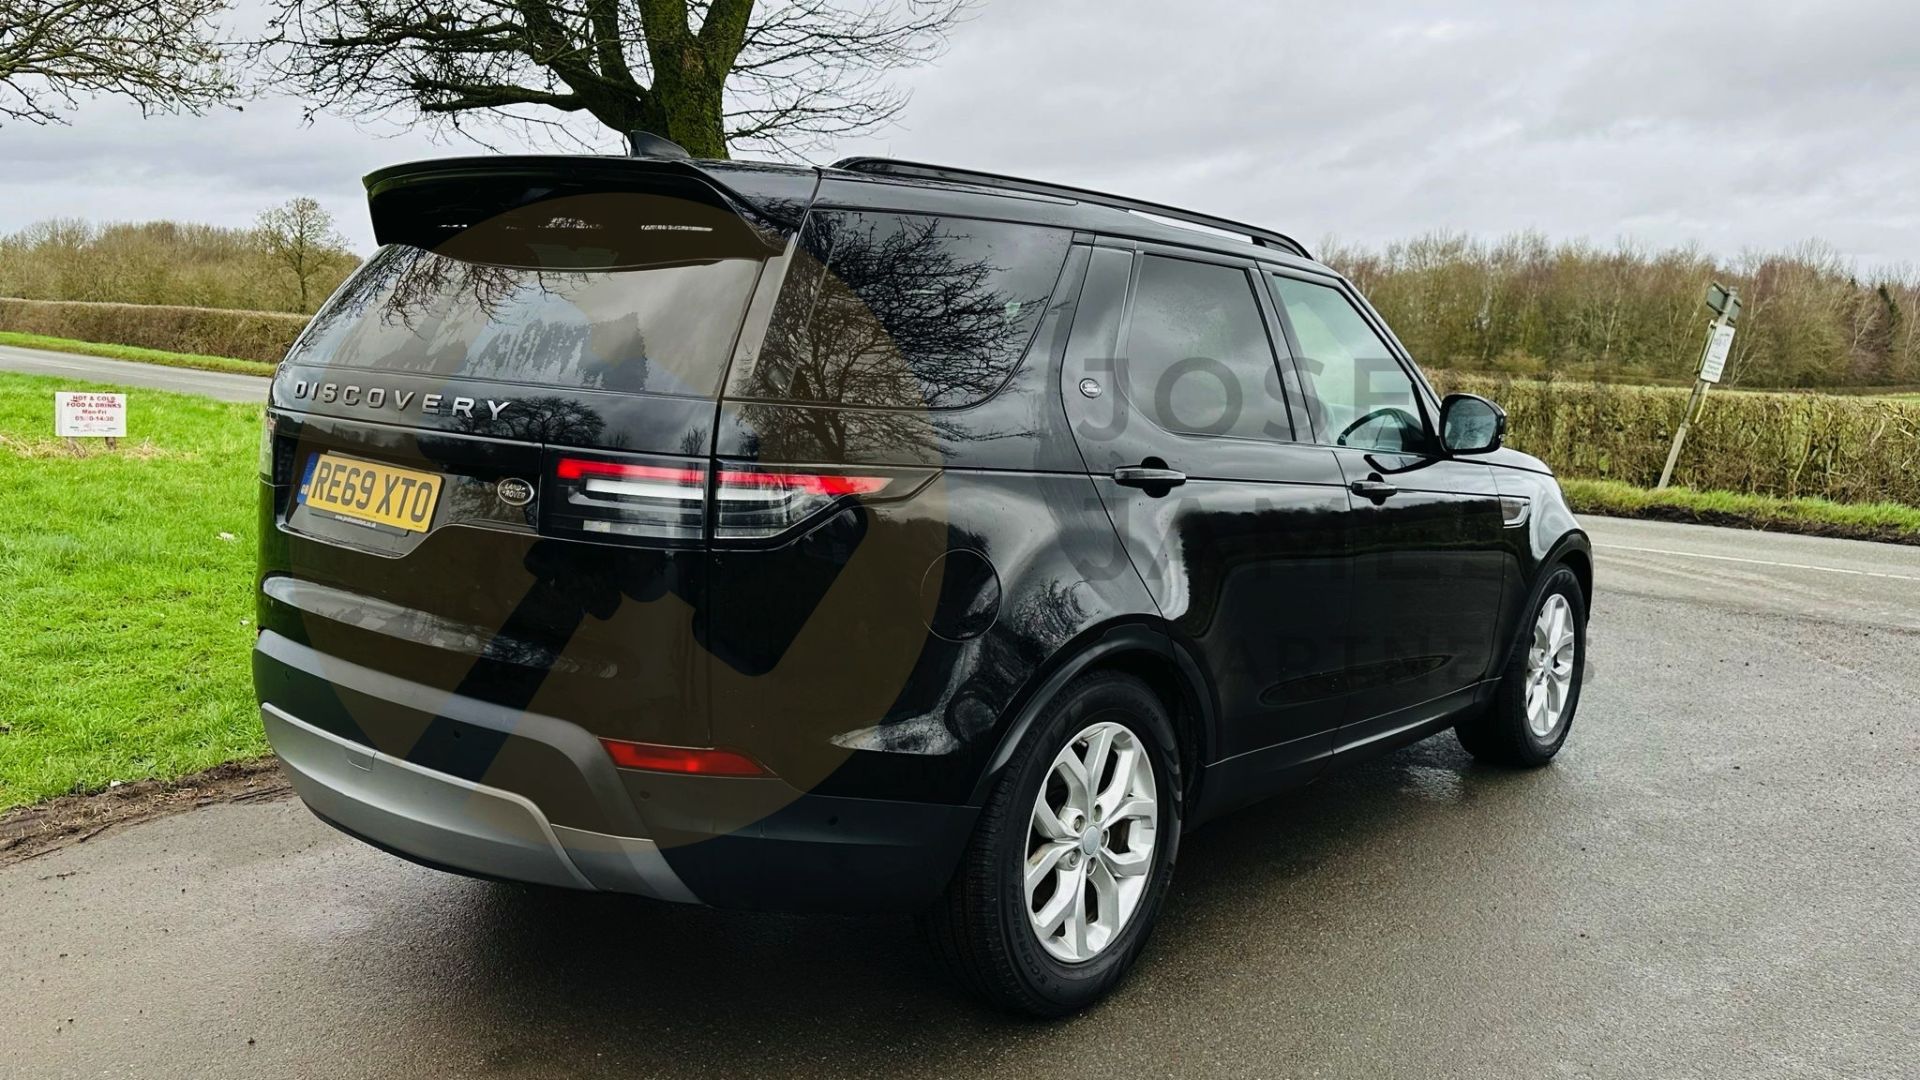 LAND ROVER DISCOVERY 5 *SE EDITION* 7 SEATER SUV (2020 - EURO 6 DIESEL) 8 SPEED AUTO *HUGE SPEC* - Image 18 of 57